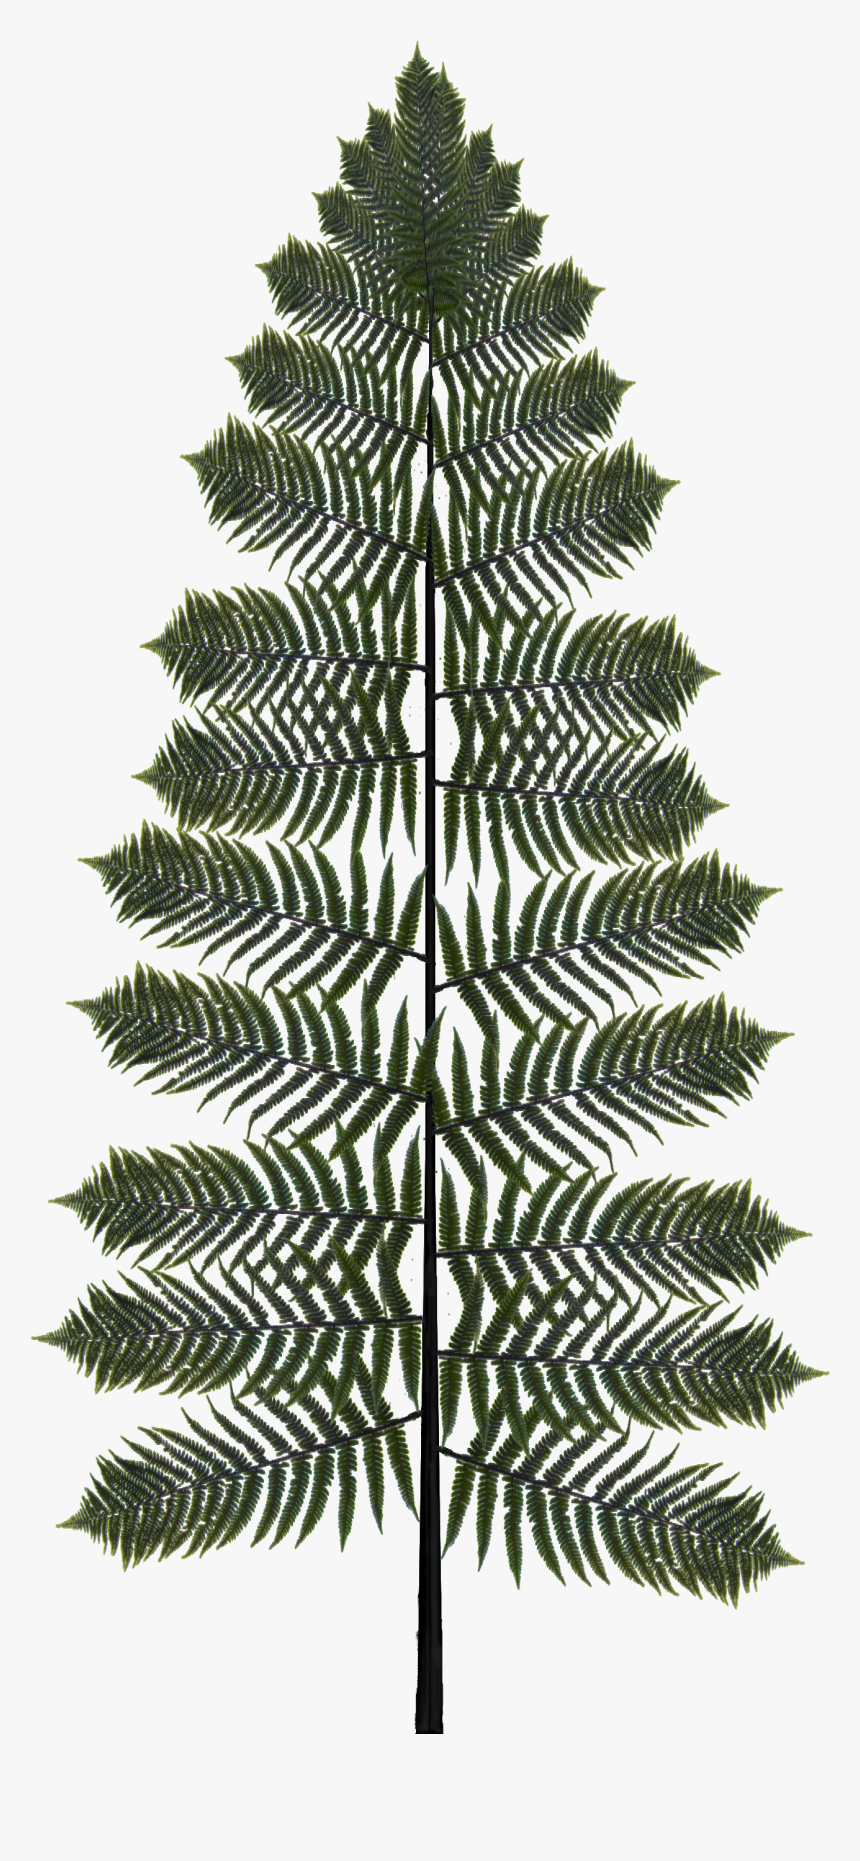 Preview - Fern, HD Png Download, Free Download